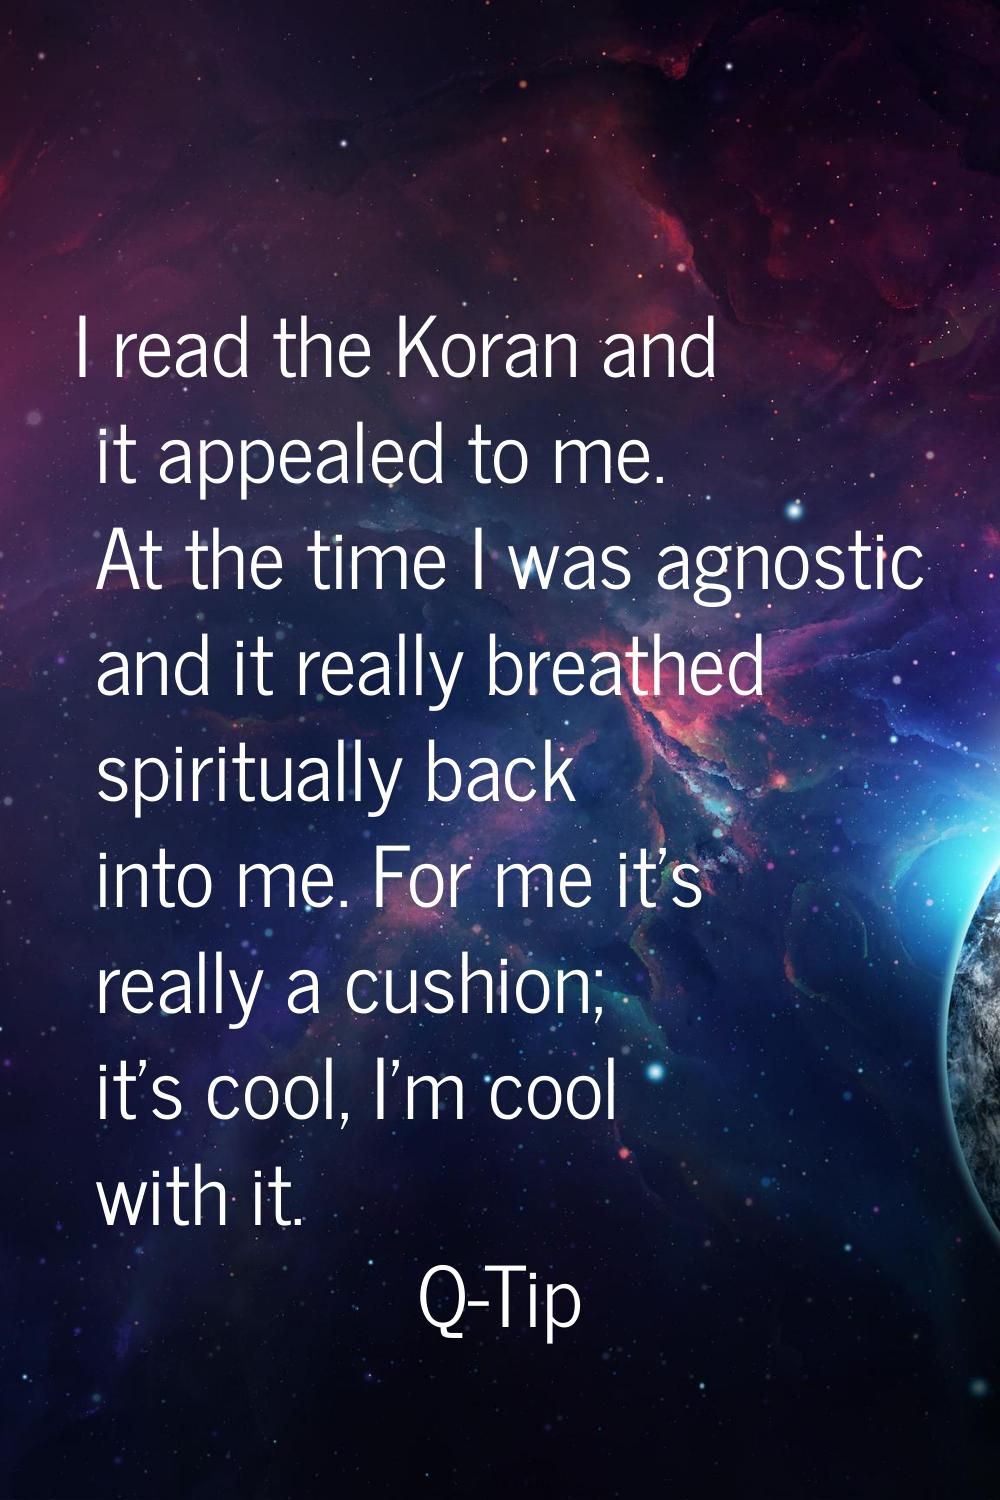 I read the Koran and it appealed to me. At the time I was agnostic and it really breathed spiritual